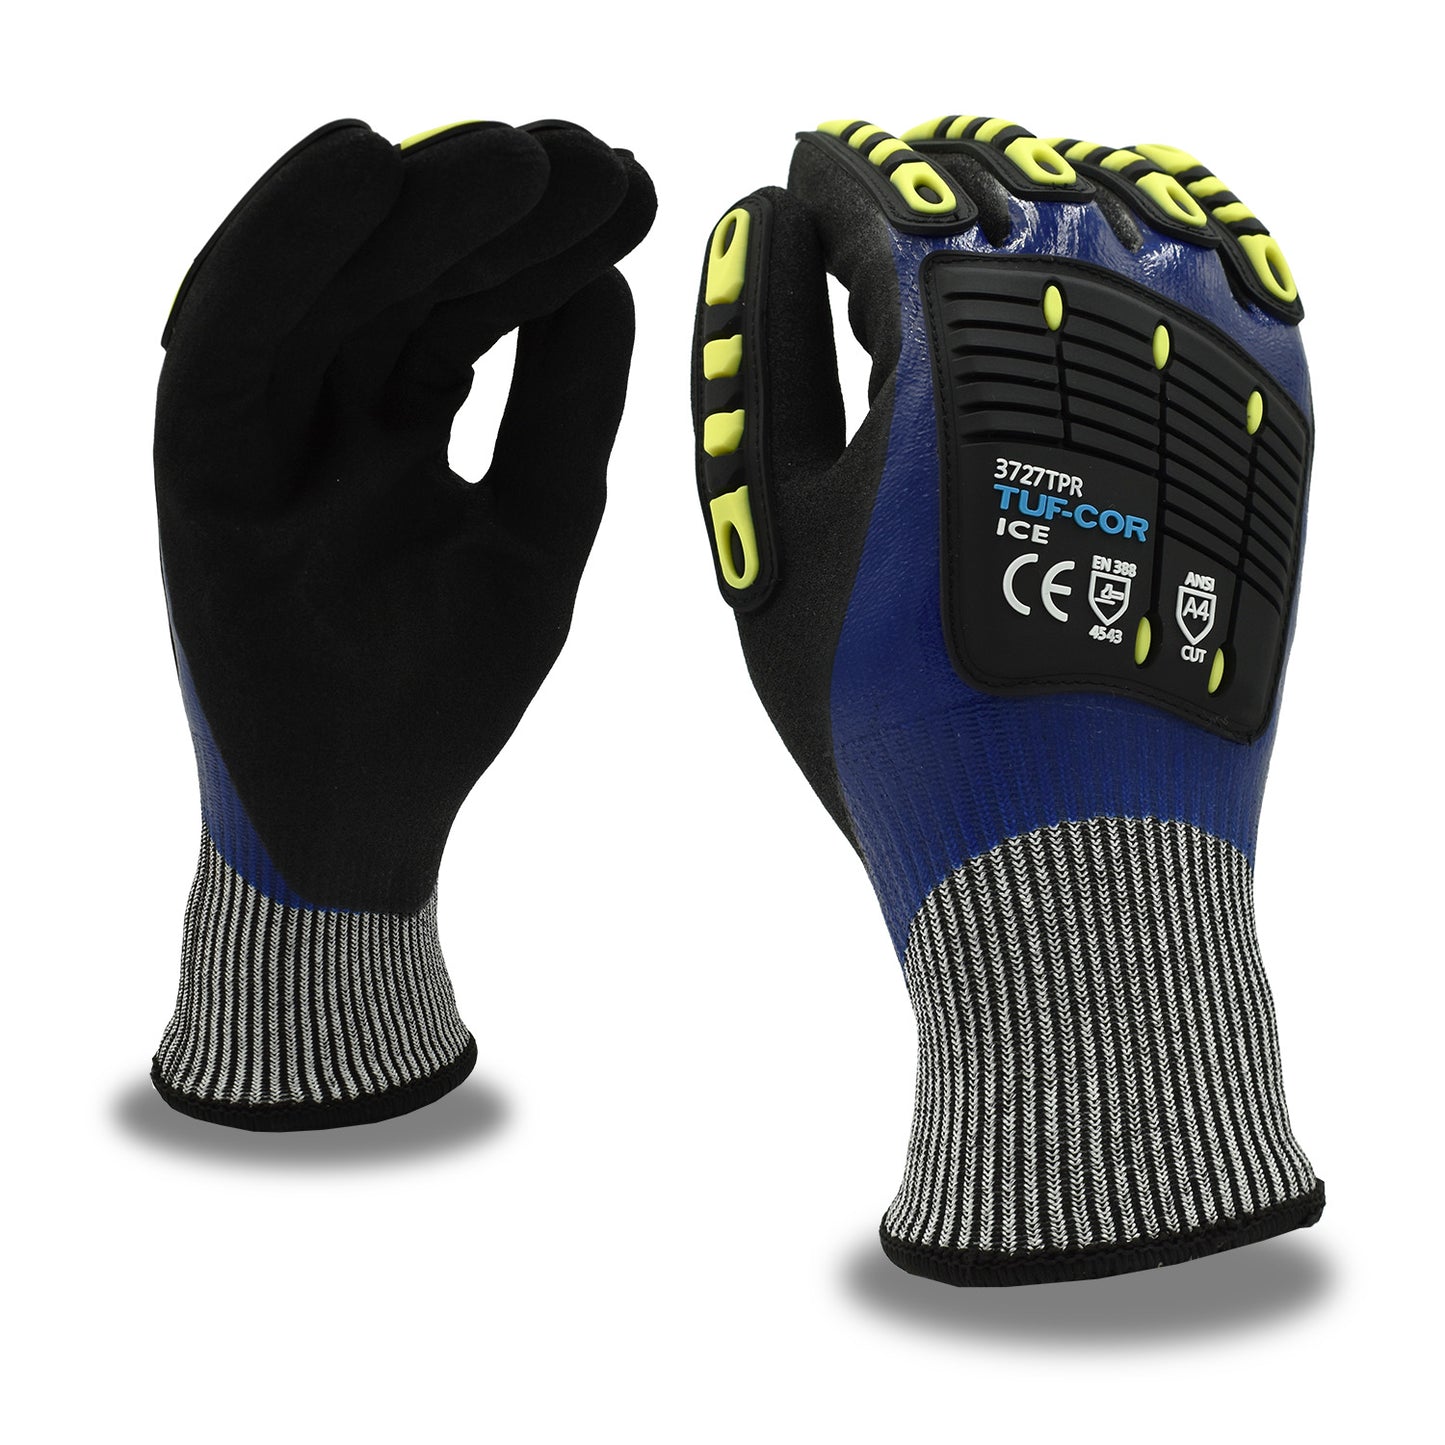 Tuf-Cor Cut-Resistant, Ice, Impact Gloves, ANSI Cut Level A4